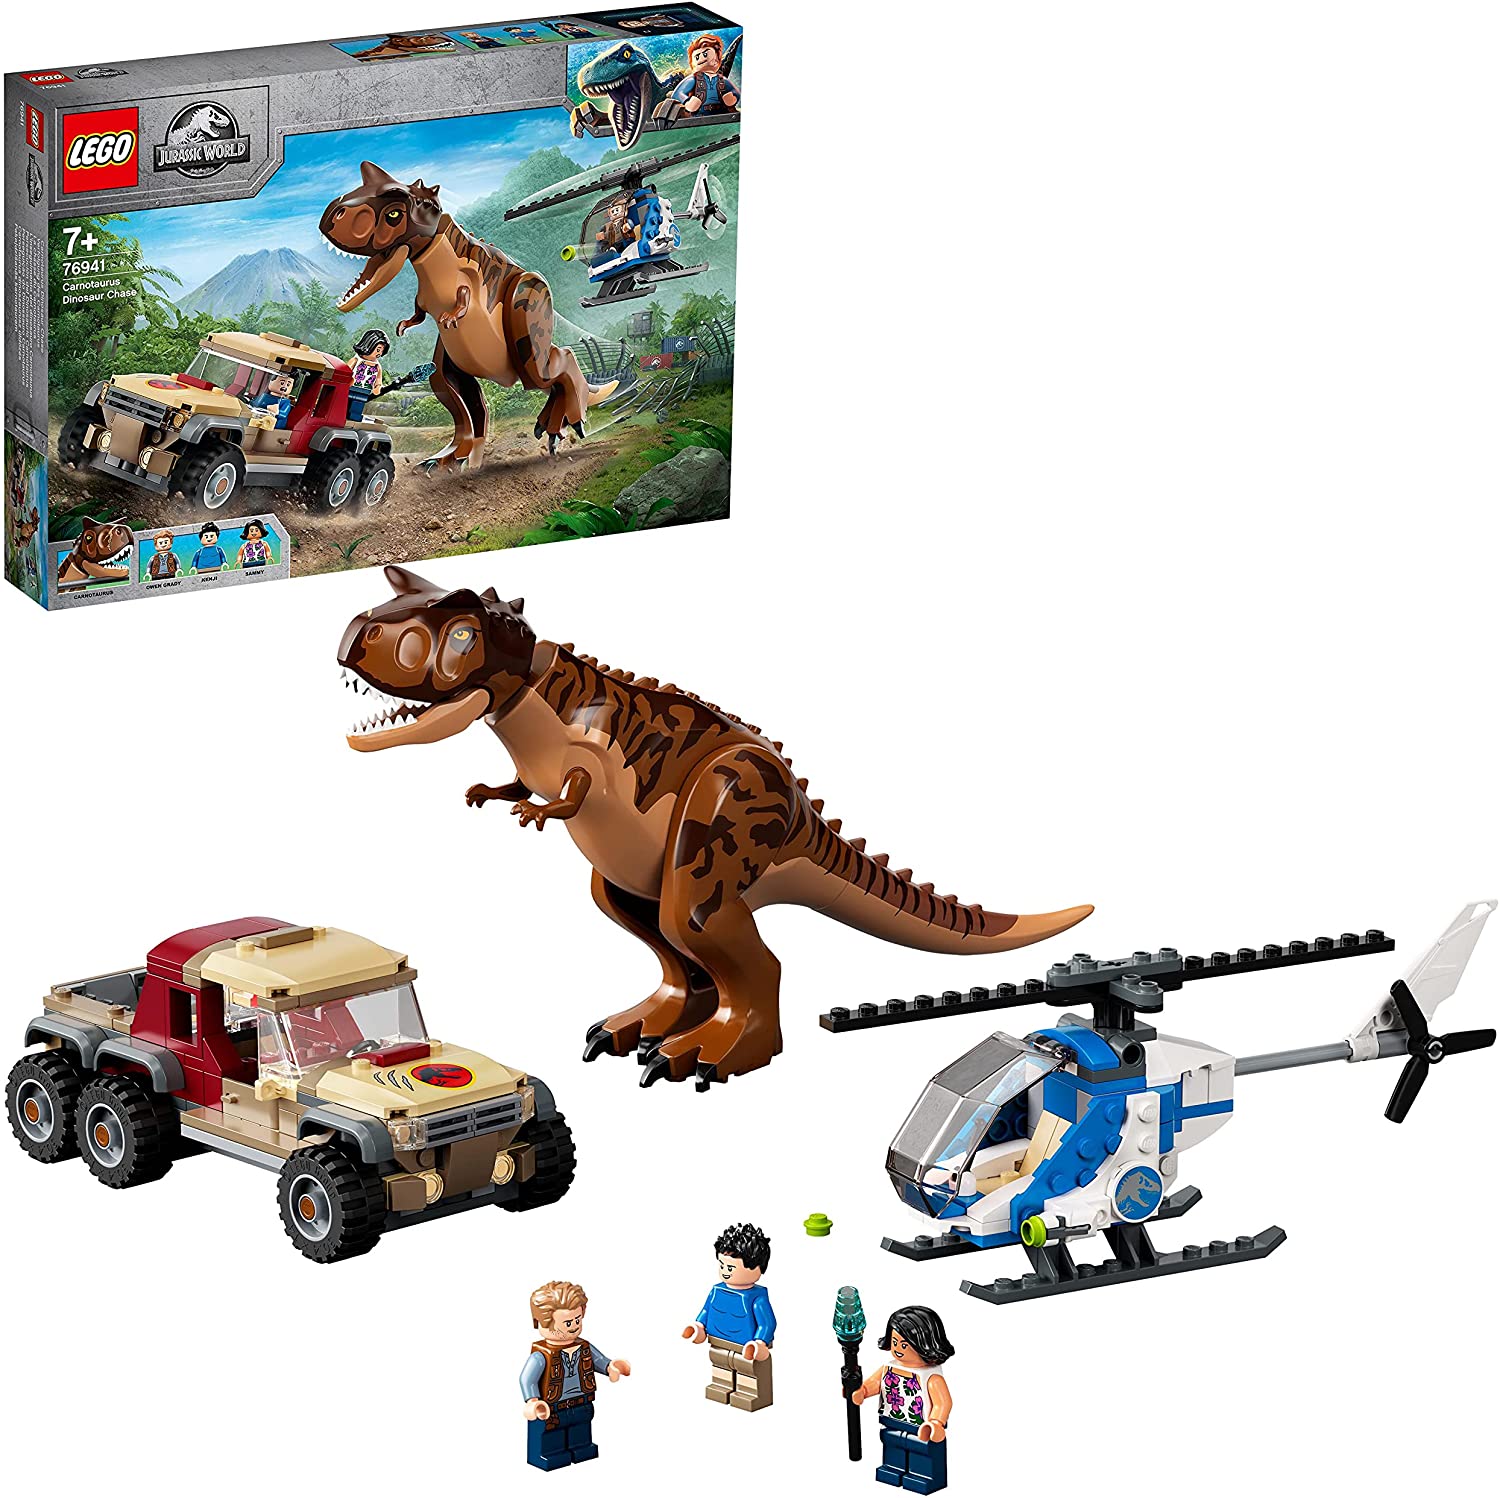 LEGO 76941 Jurassic World Chasing of Carnotaurus Toy with Helicopter and Pi